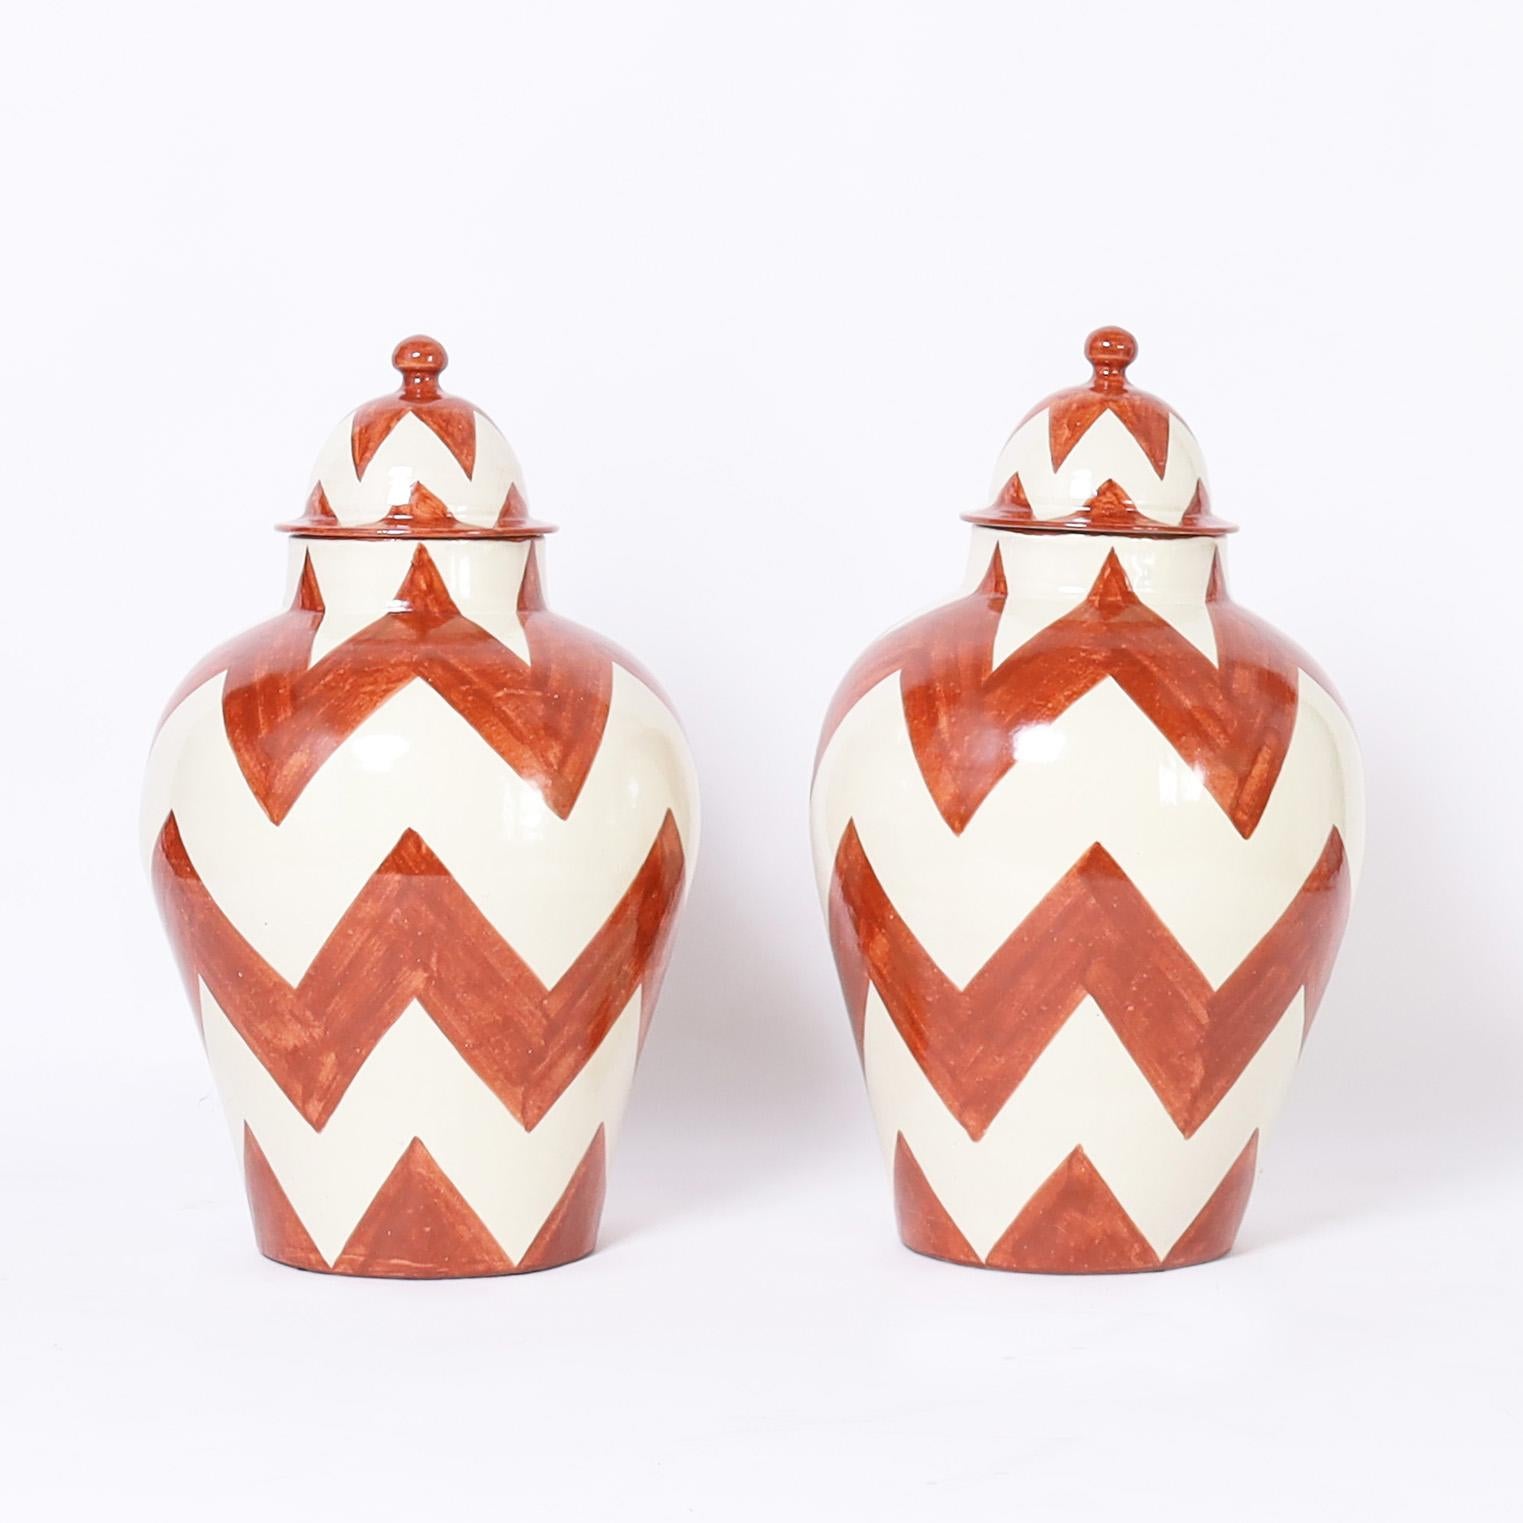 Striking pair of vintage lidded urns handcrafted in terra cotta in classic form and hand decorated in a chevron motif. Signed Mexico on the bottoms.